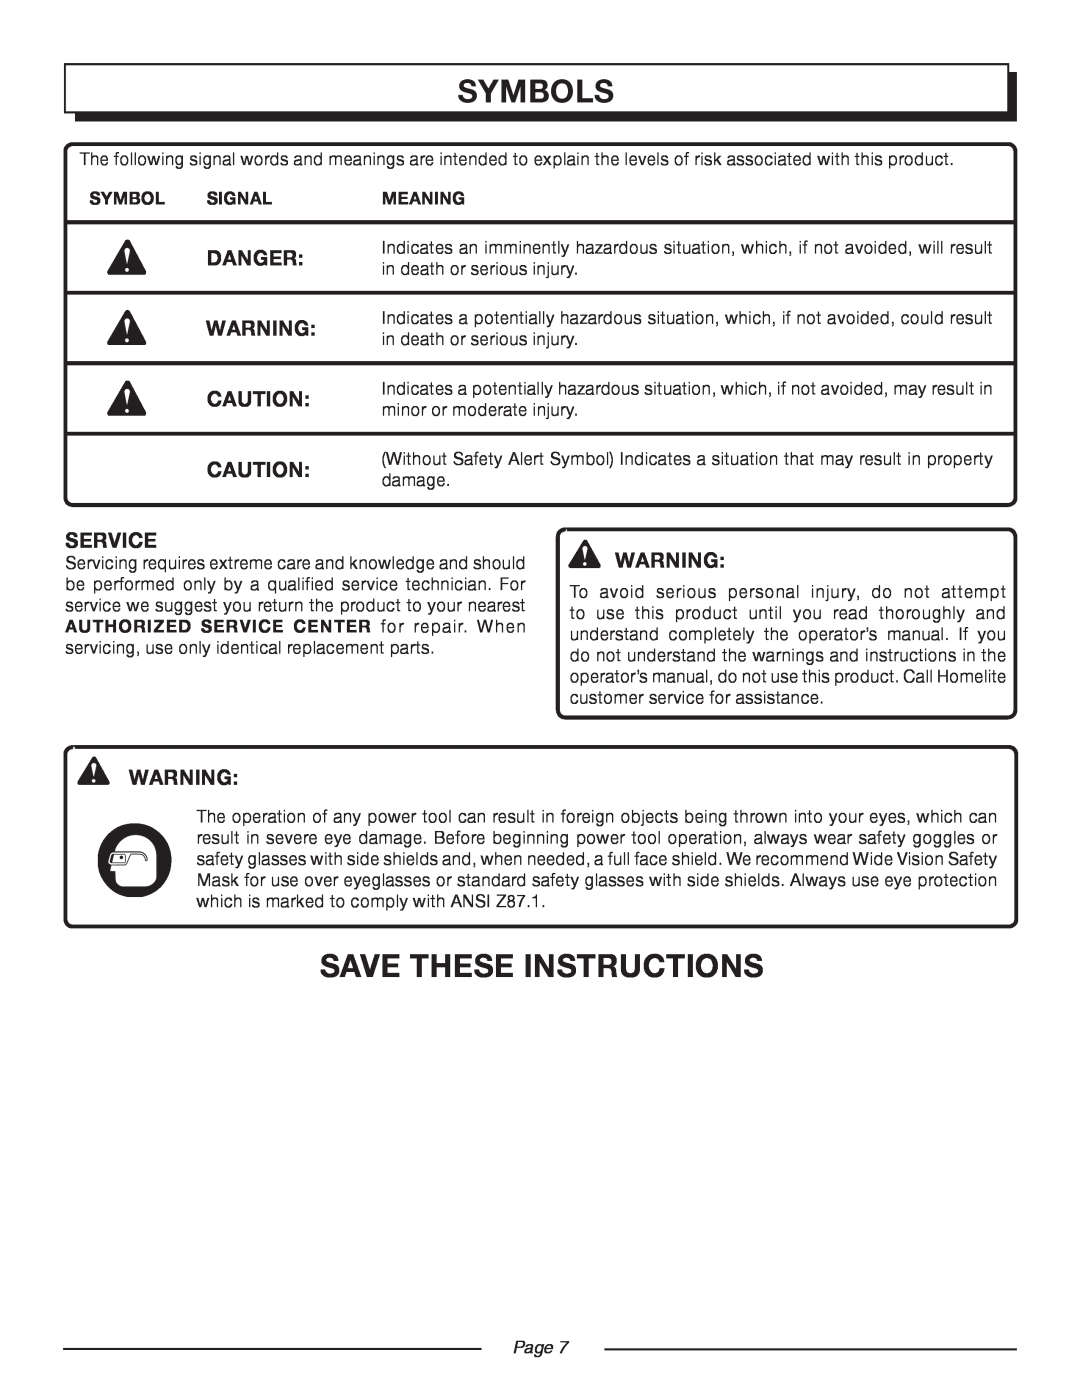 Homelite UT44170 manual Save These Instructions, Danger, Service, Symbols, Page  